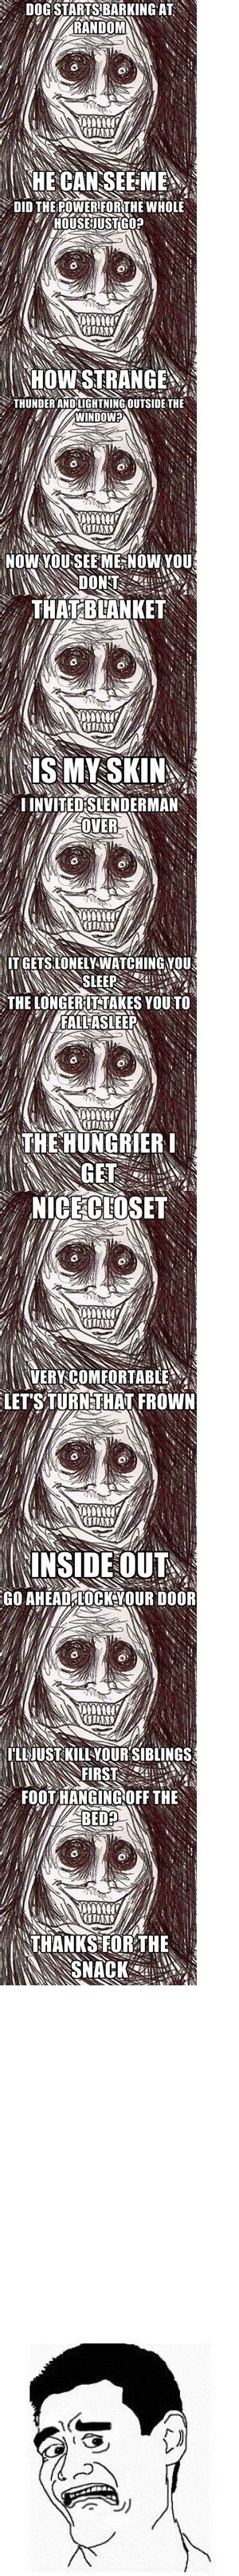 horrifying house guest pictures and jokes memes funny pictures and best jokes comics images